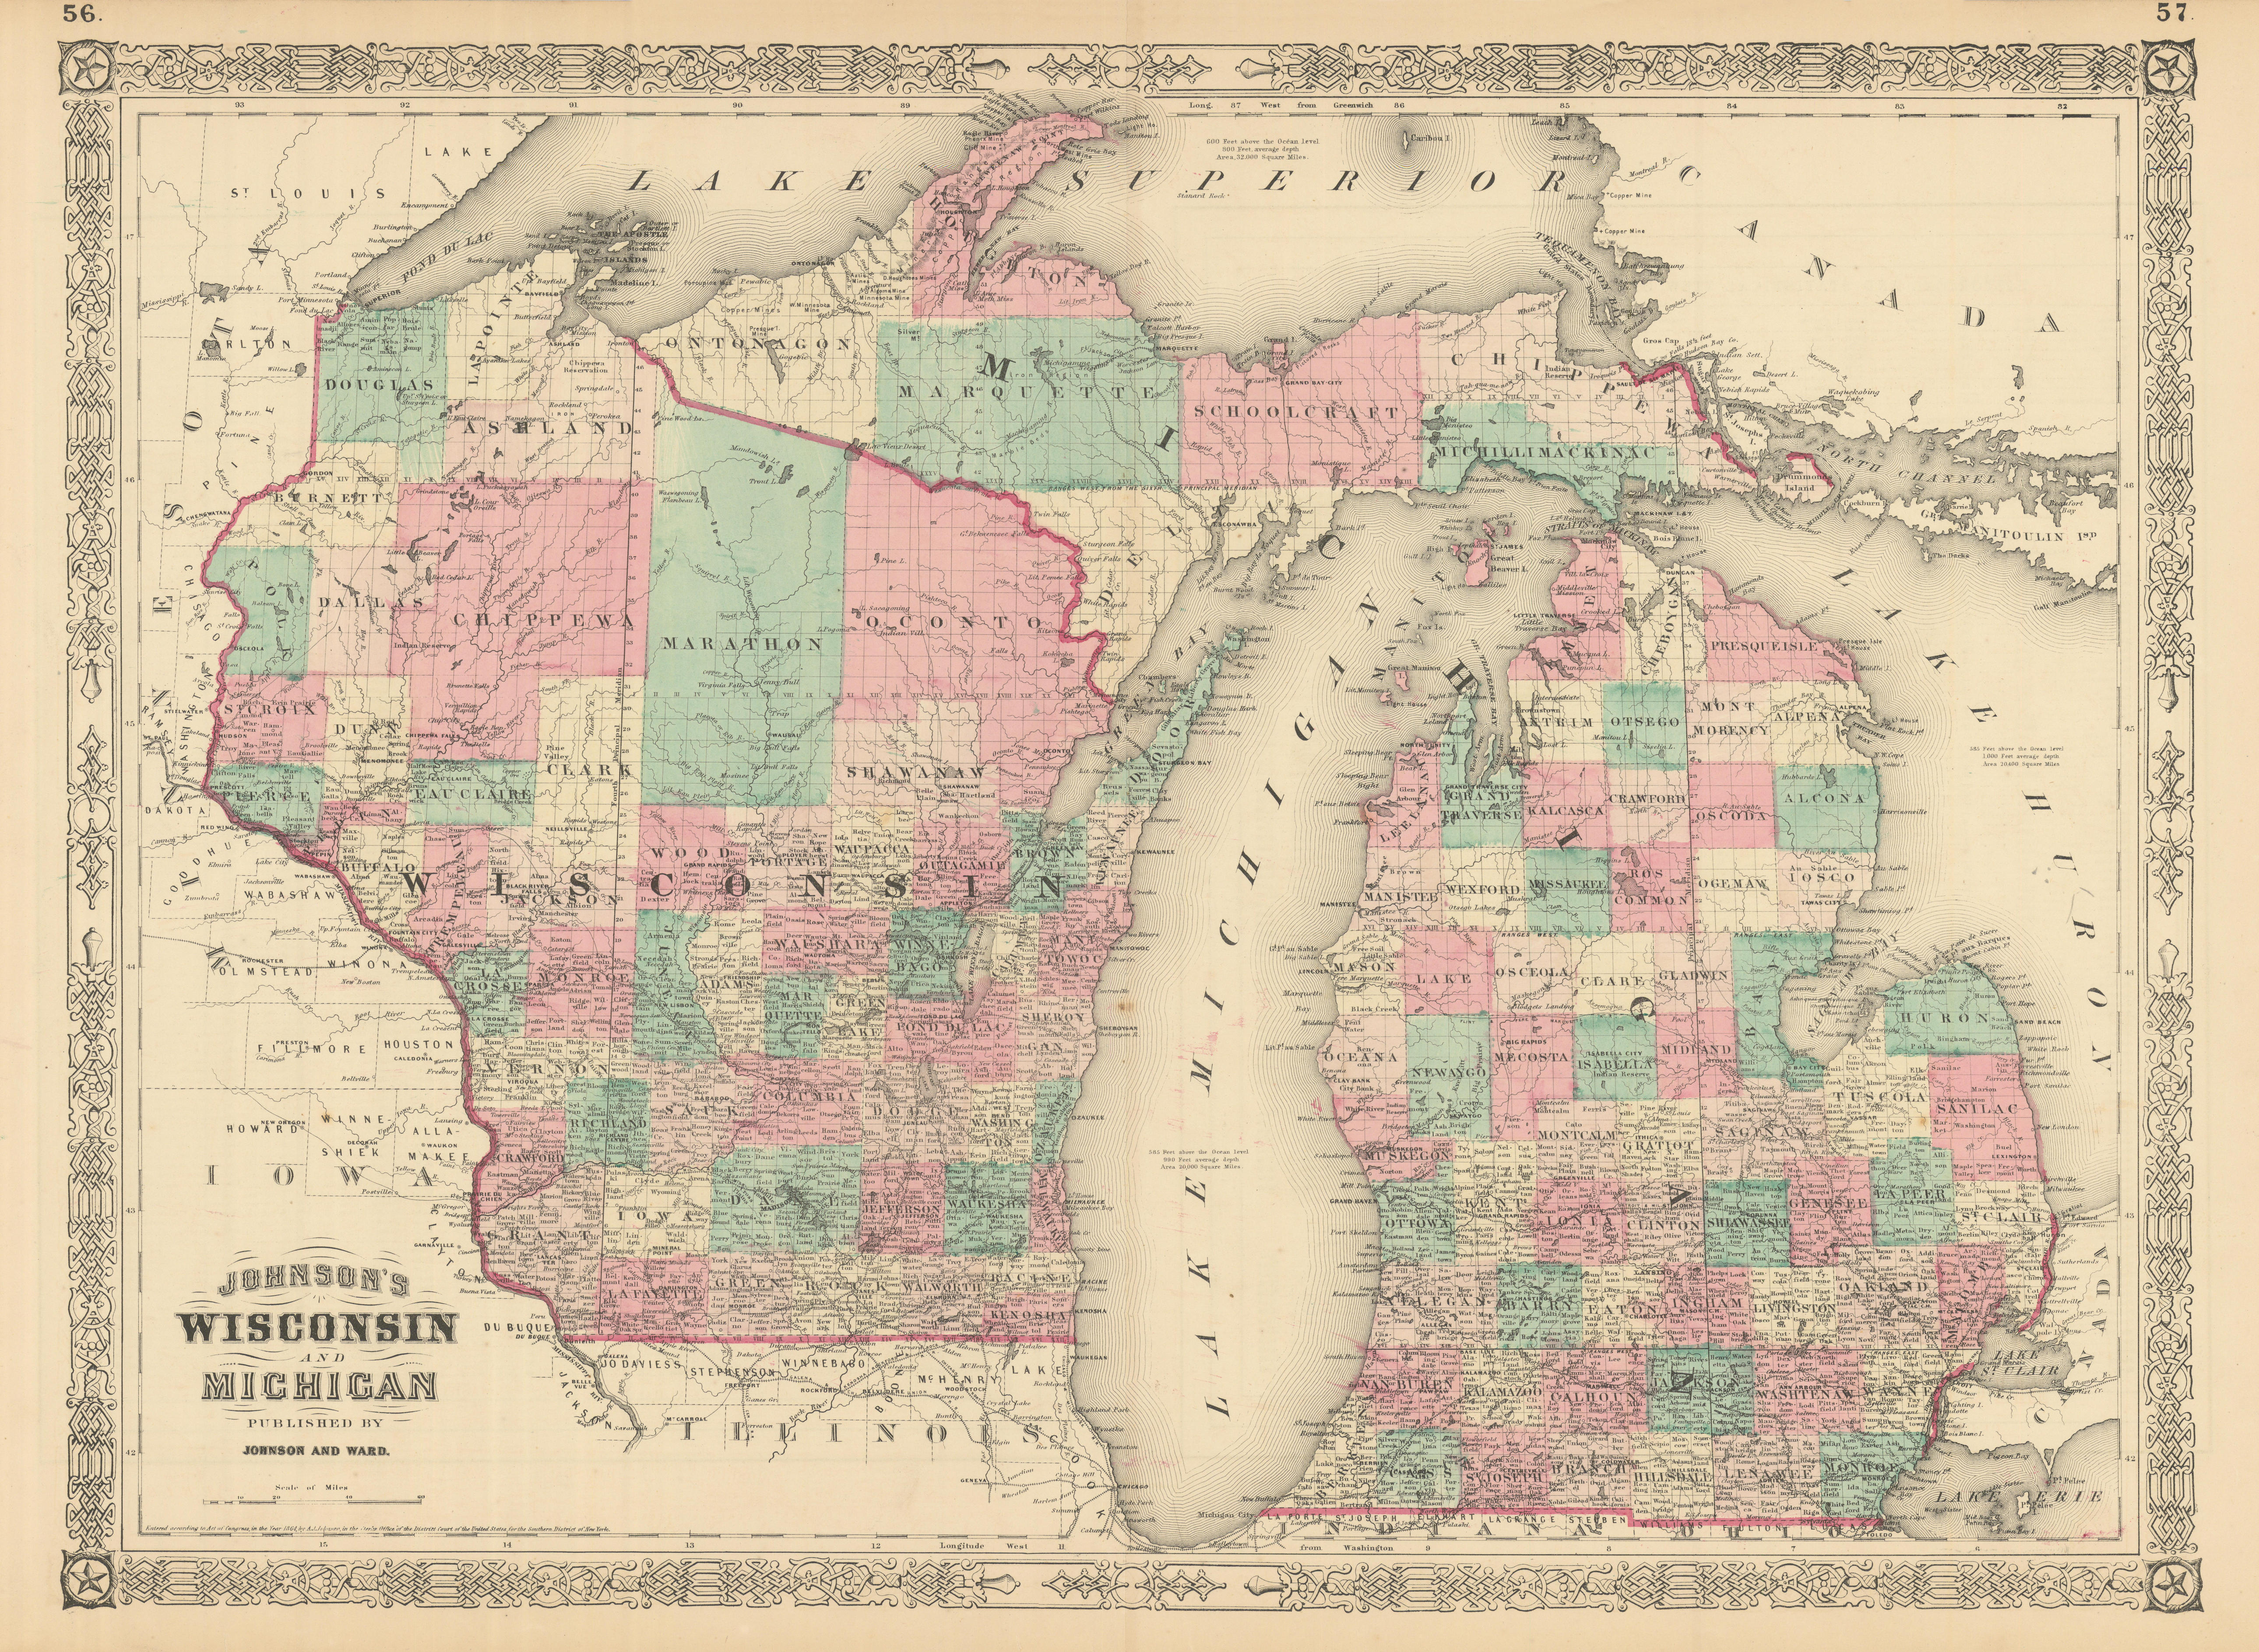 Associate Product Johnson's Wisconsin & Michigan. State map showing counties. Great Lakes 1866